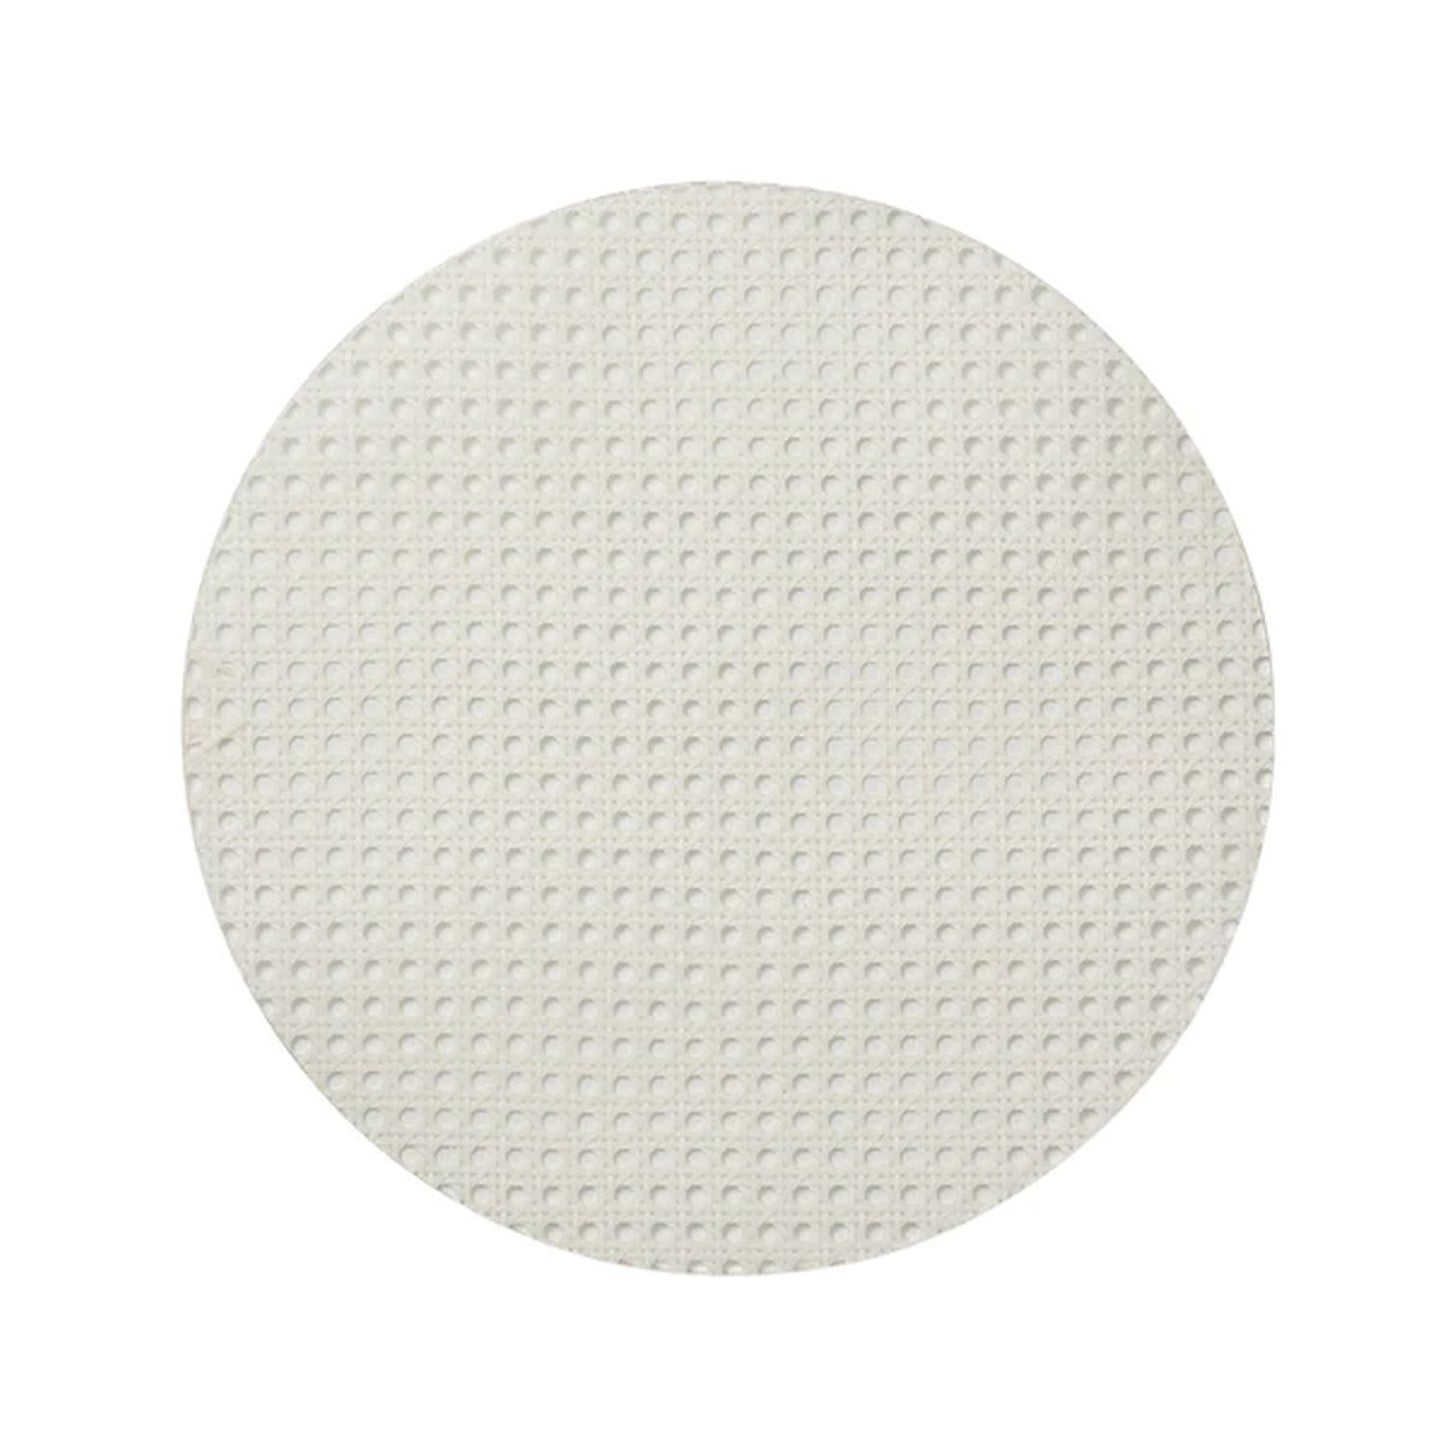 Kim Seybert Reed Placemat in White, Set of 4